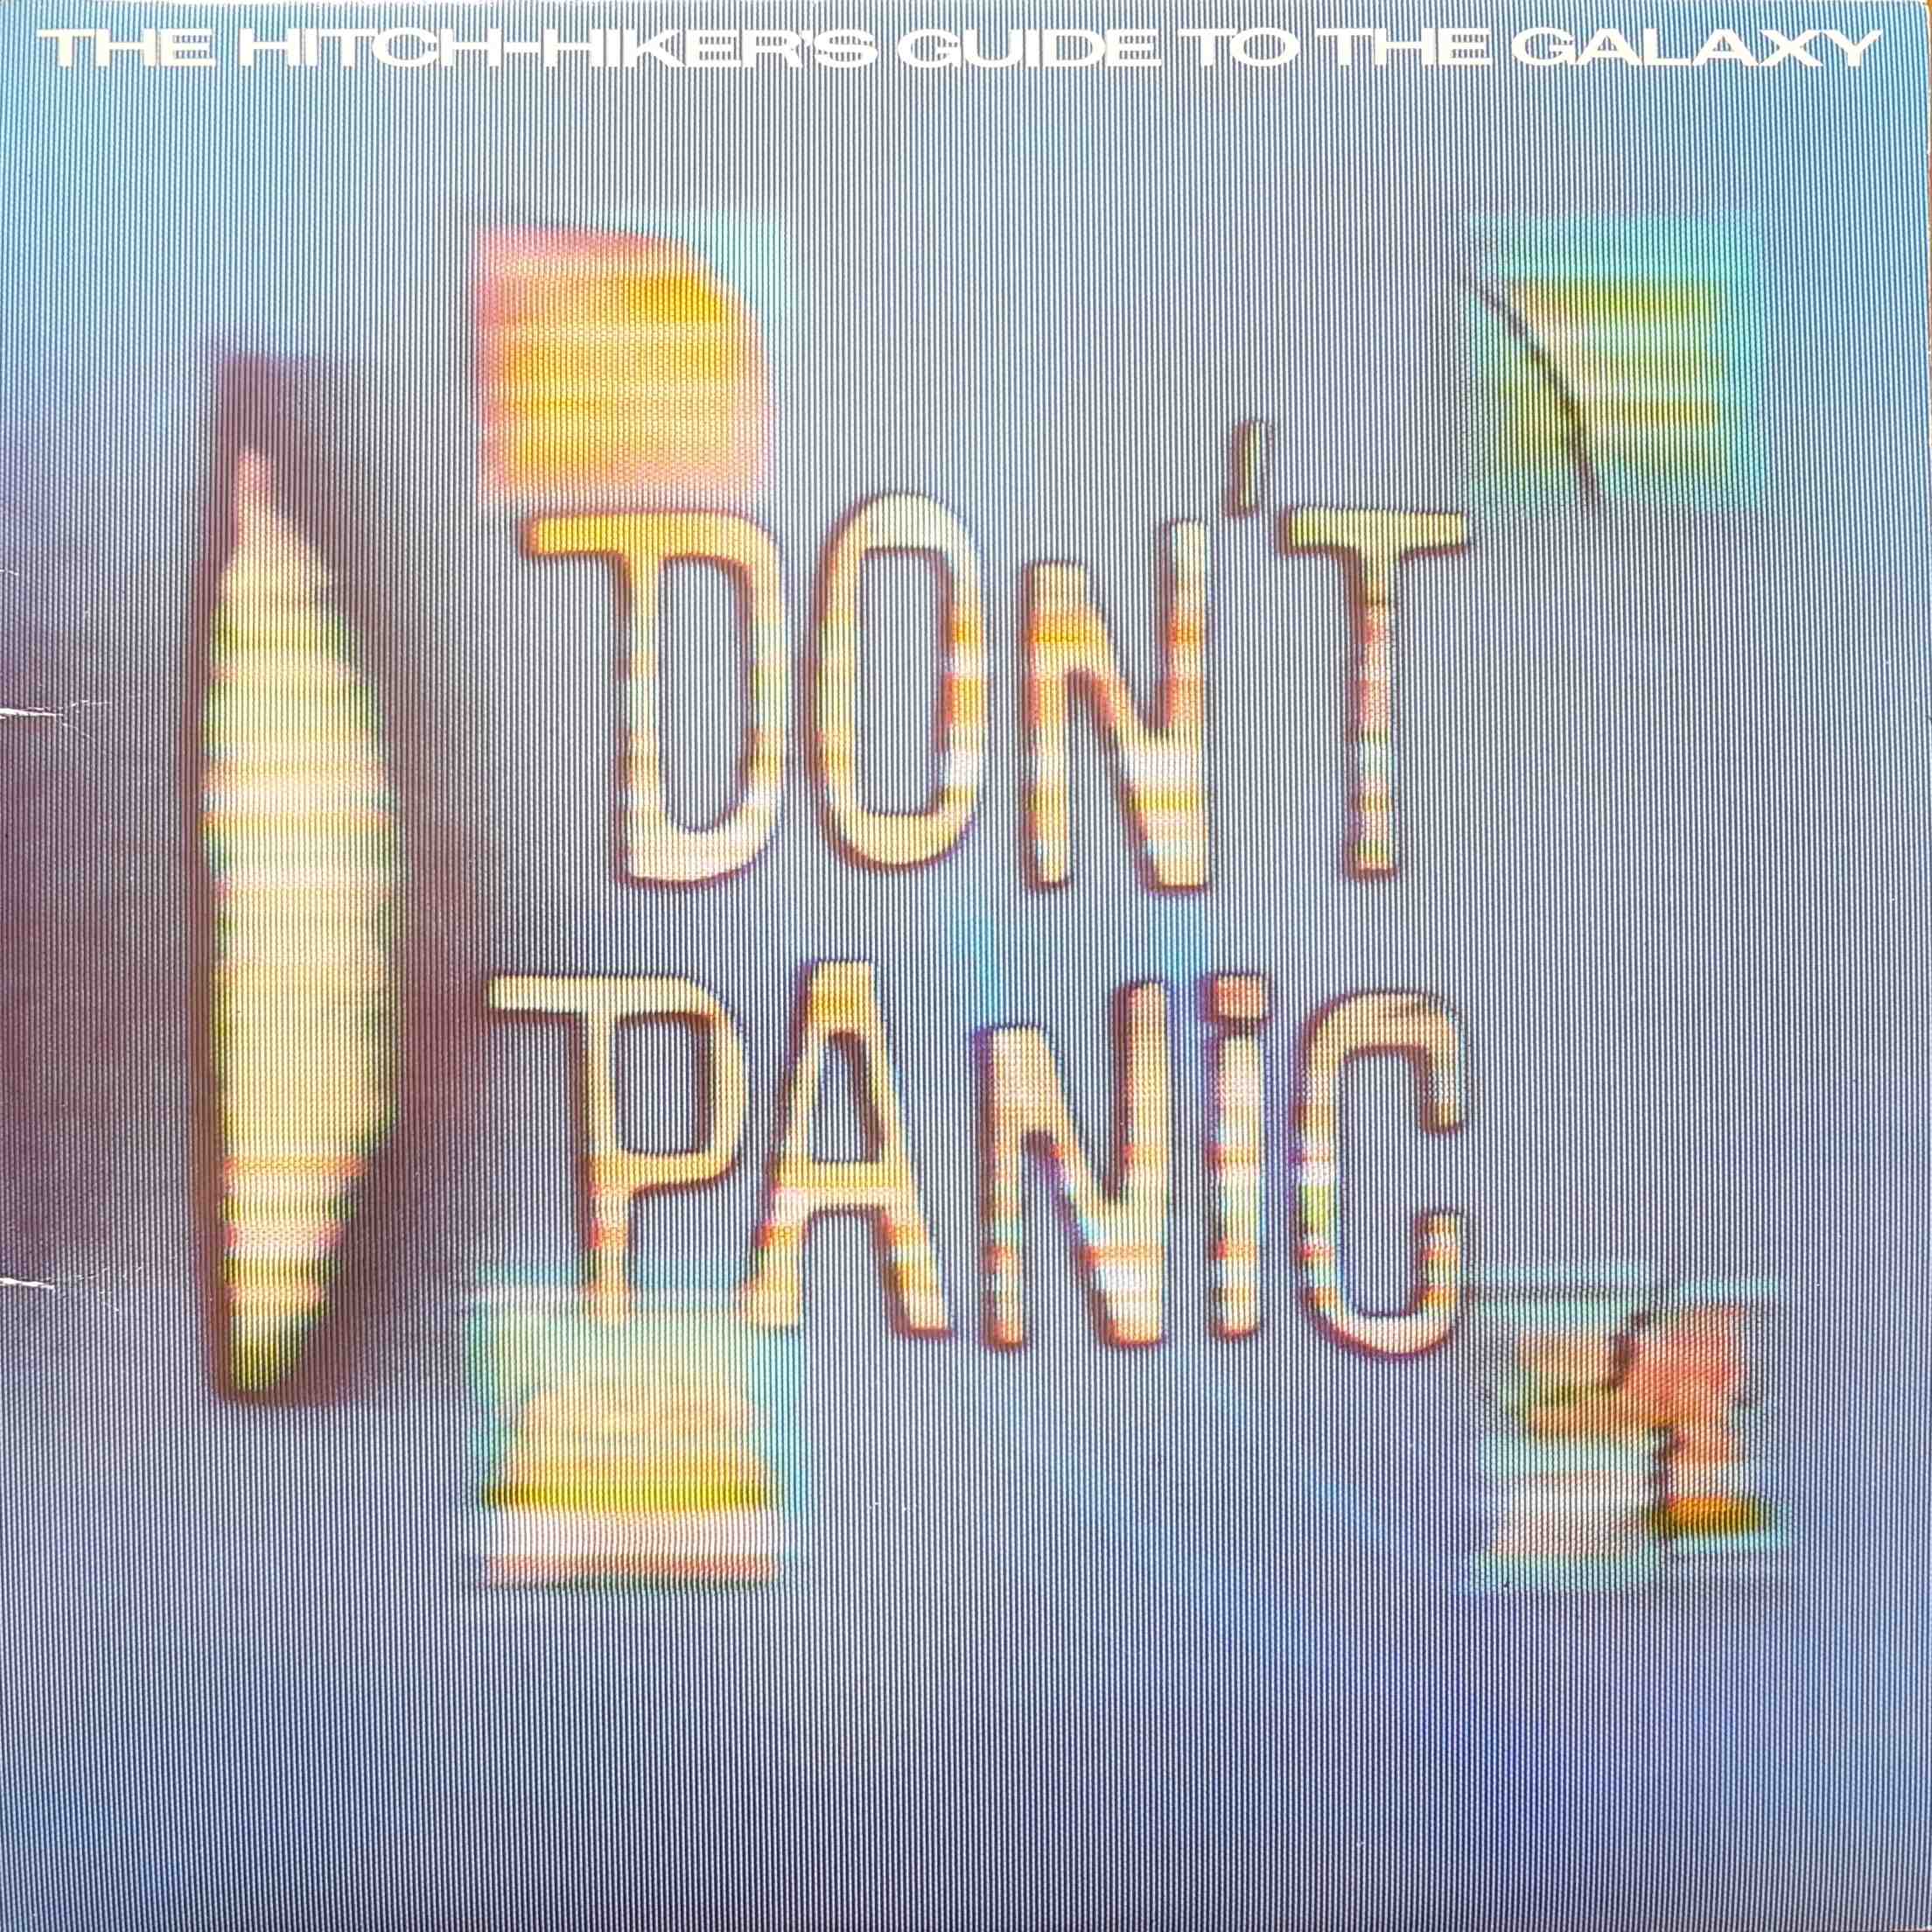 Picture of ORA 42 The hitch-hiker's guide to the Galaxy by artist Douglas Adams from the BBC albums - Records and Tapes library